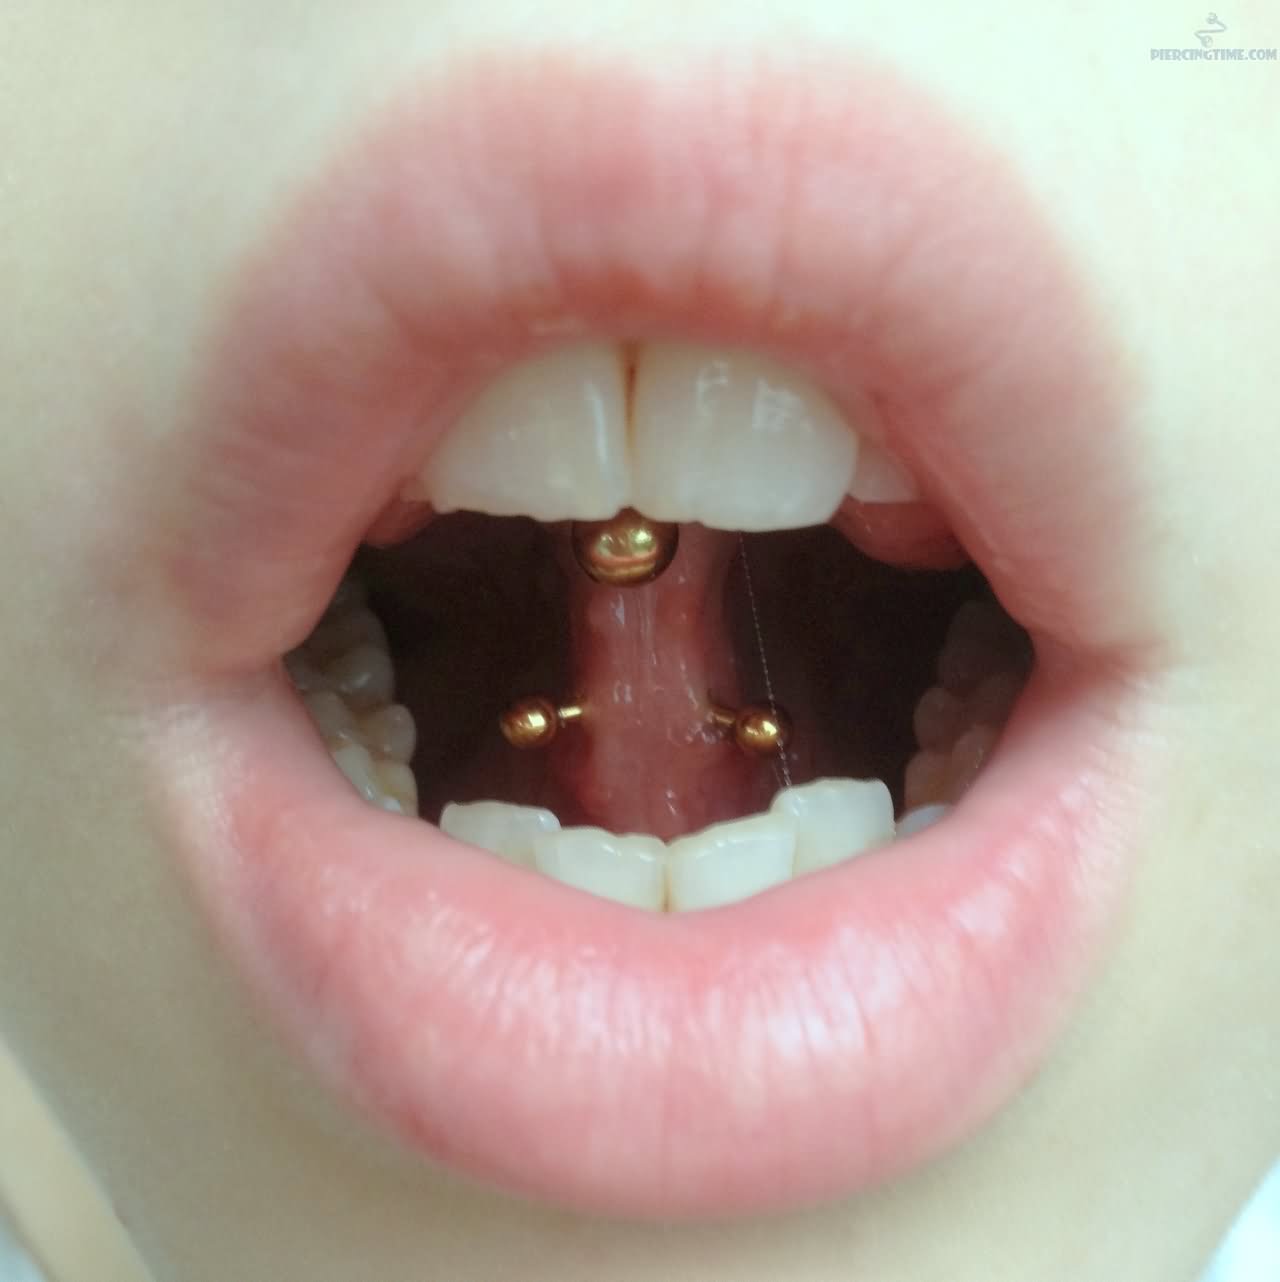 Lingual Frenulum Piercing With Gold Barbell